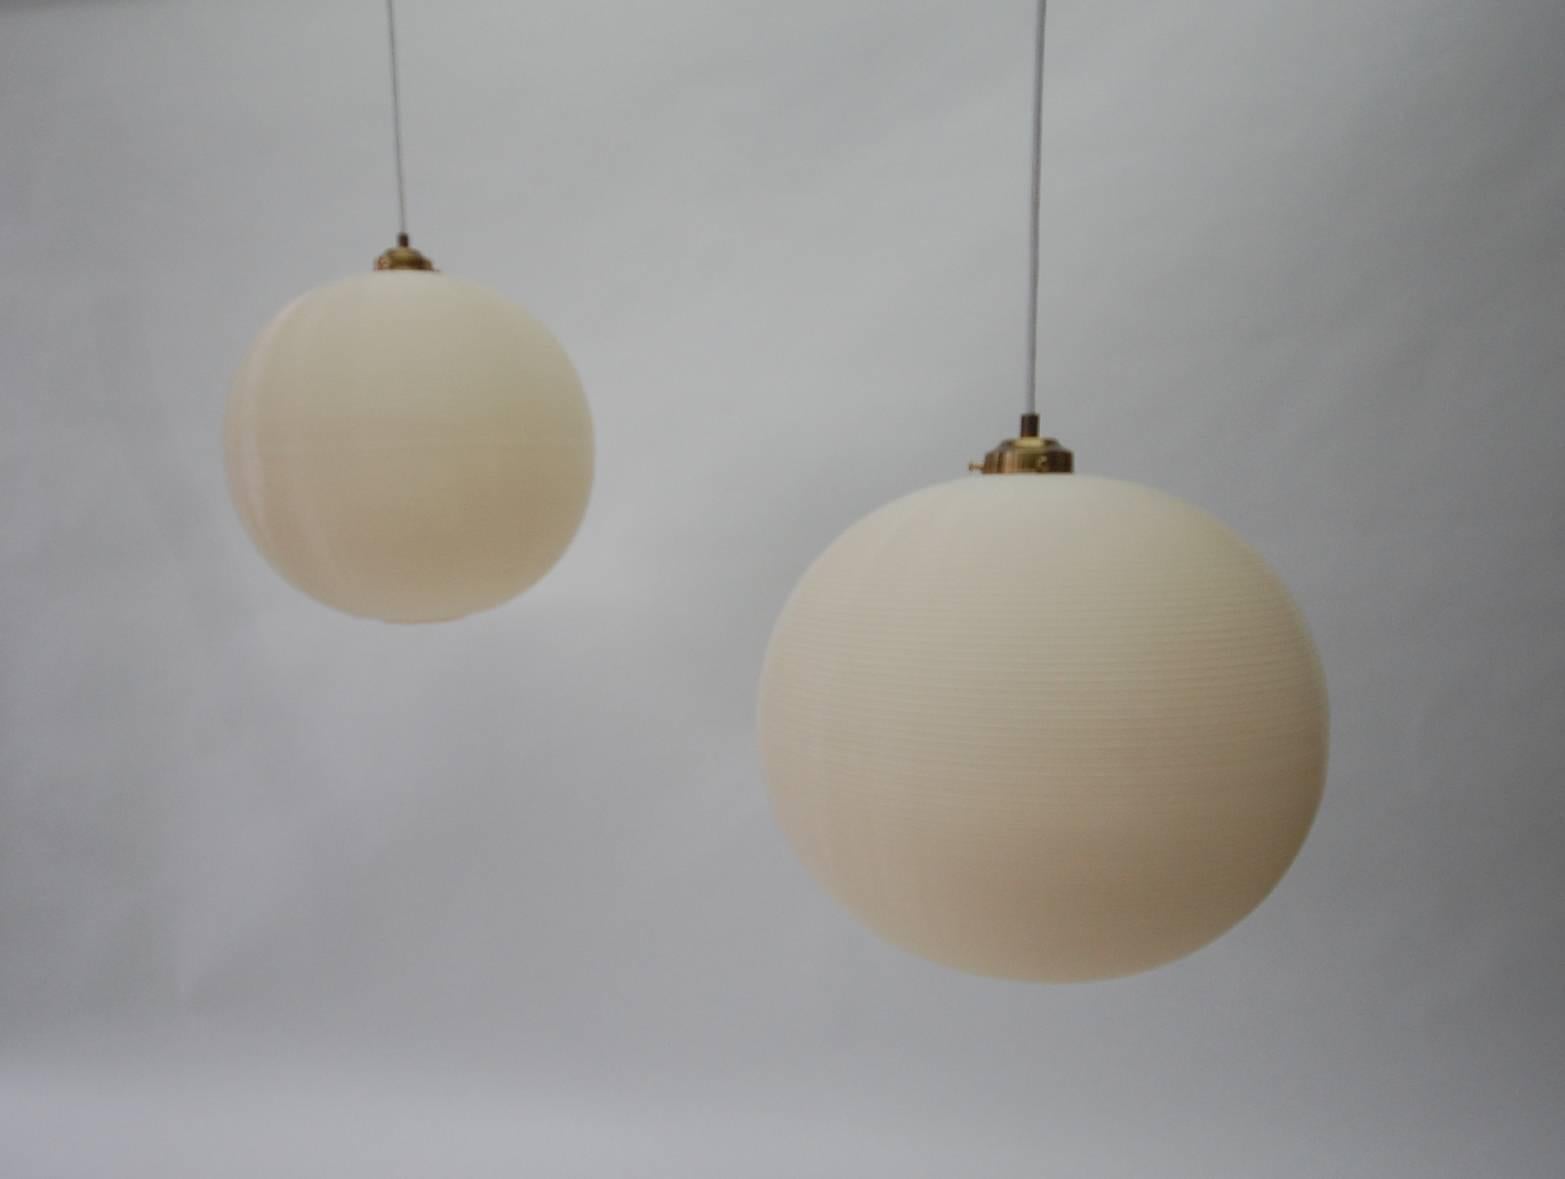 Pair of Rotoflex pendant lights by Heifetz. Constructed of spun striated plastic in contrasting bands of white and off-white. Completely rewired. Brand new porcelain sockets, wiring and brass canopies. Priced for the pair, but will sell